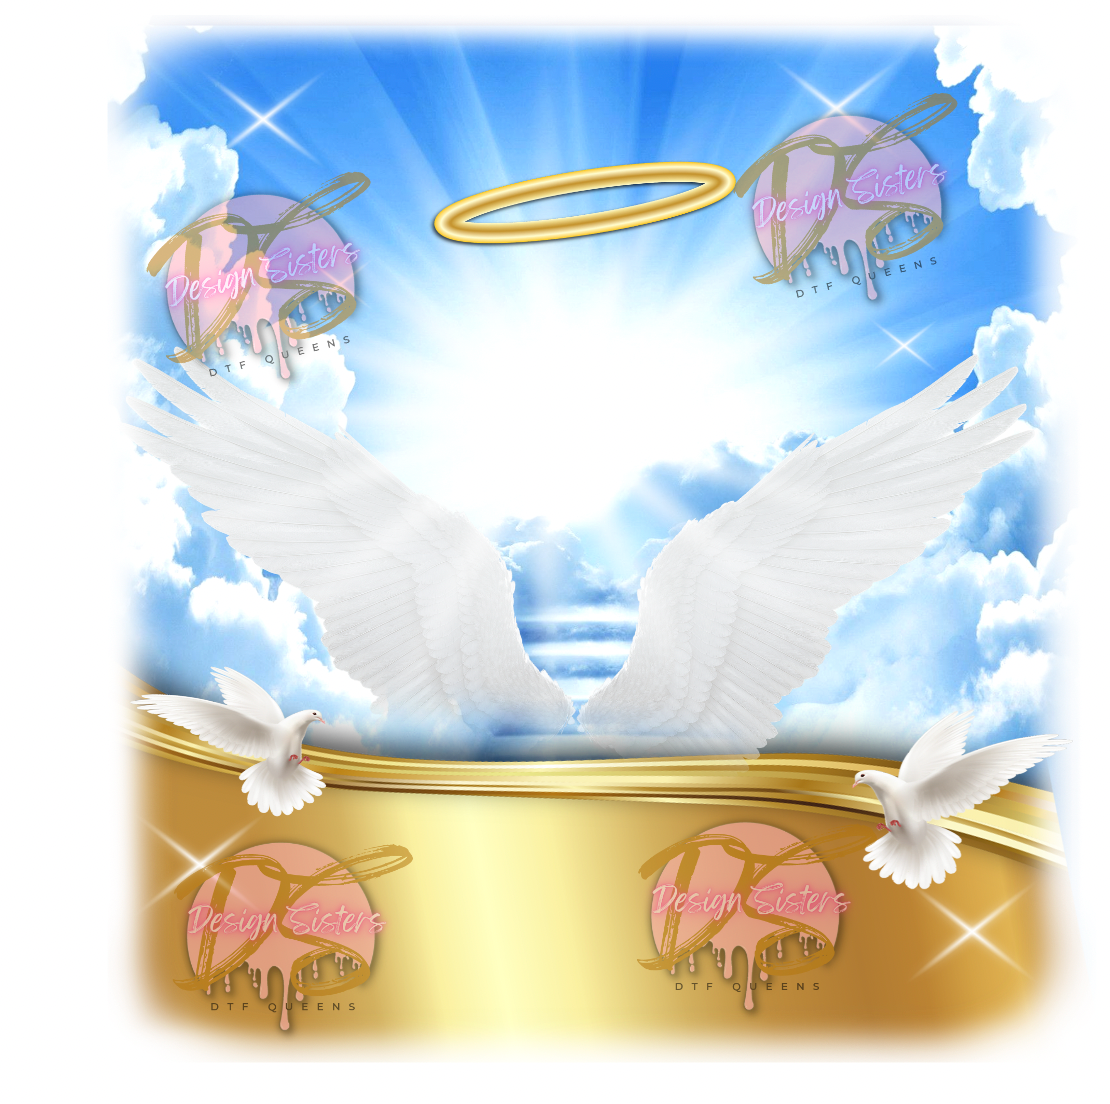 In Loving Memory PNG Memorial Background EDITABLE Template Stairs to Heaven  Rest in Peace Digital Files 